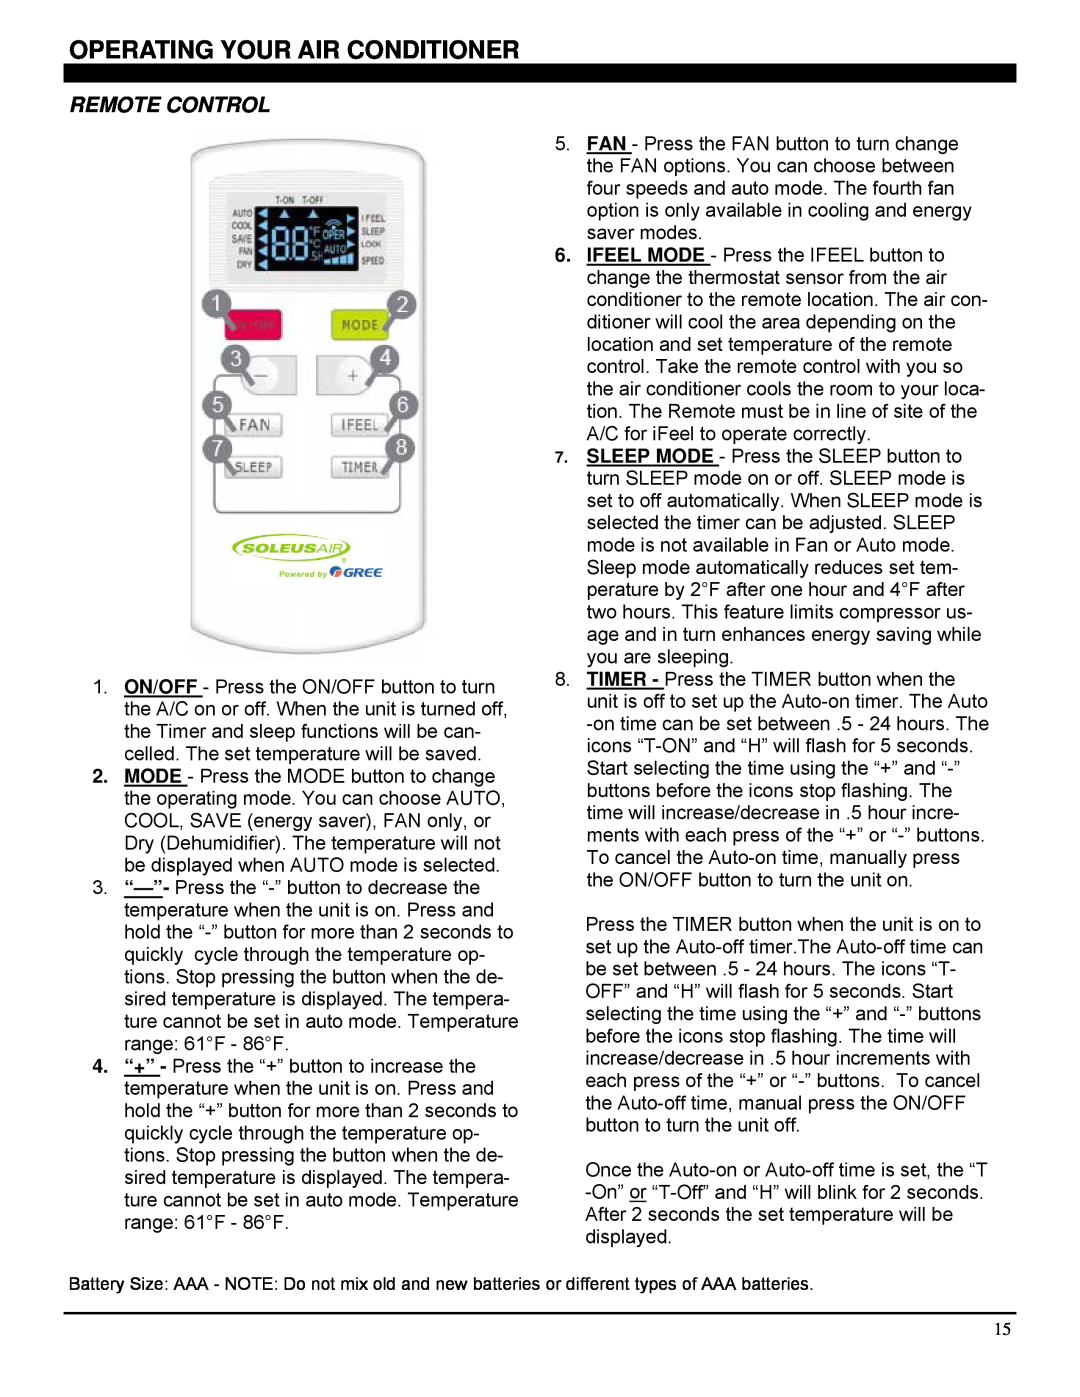 Soleus Air SG-WAC-25ESE-C operating instructions Operating Your Air Conditioner, Remote Control 